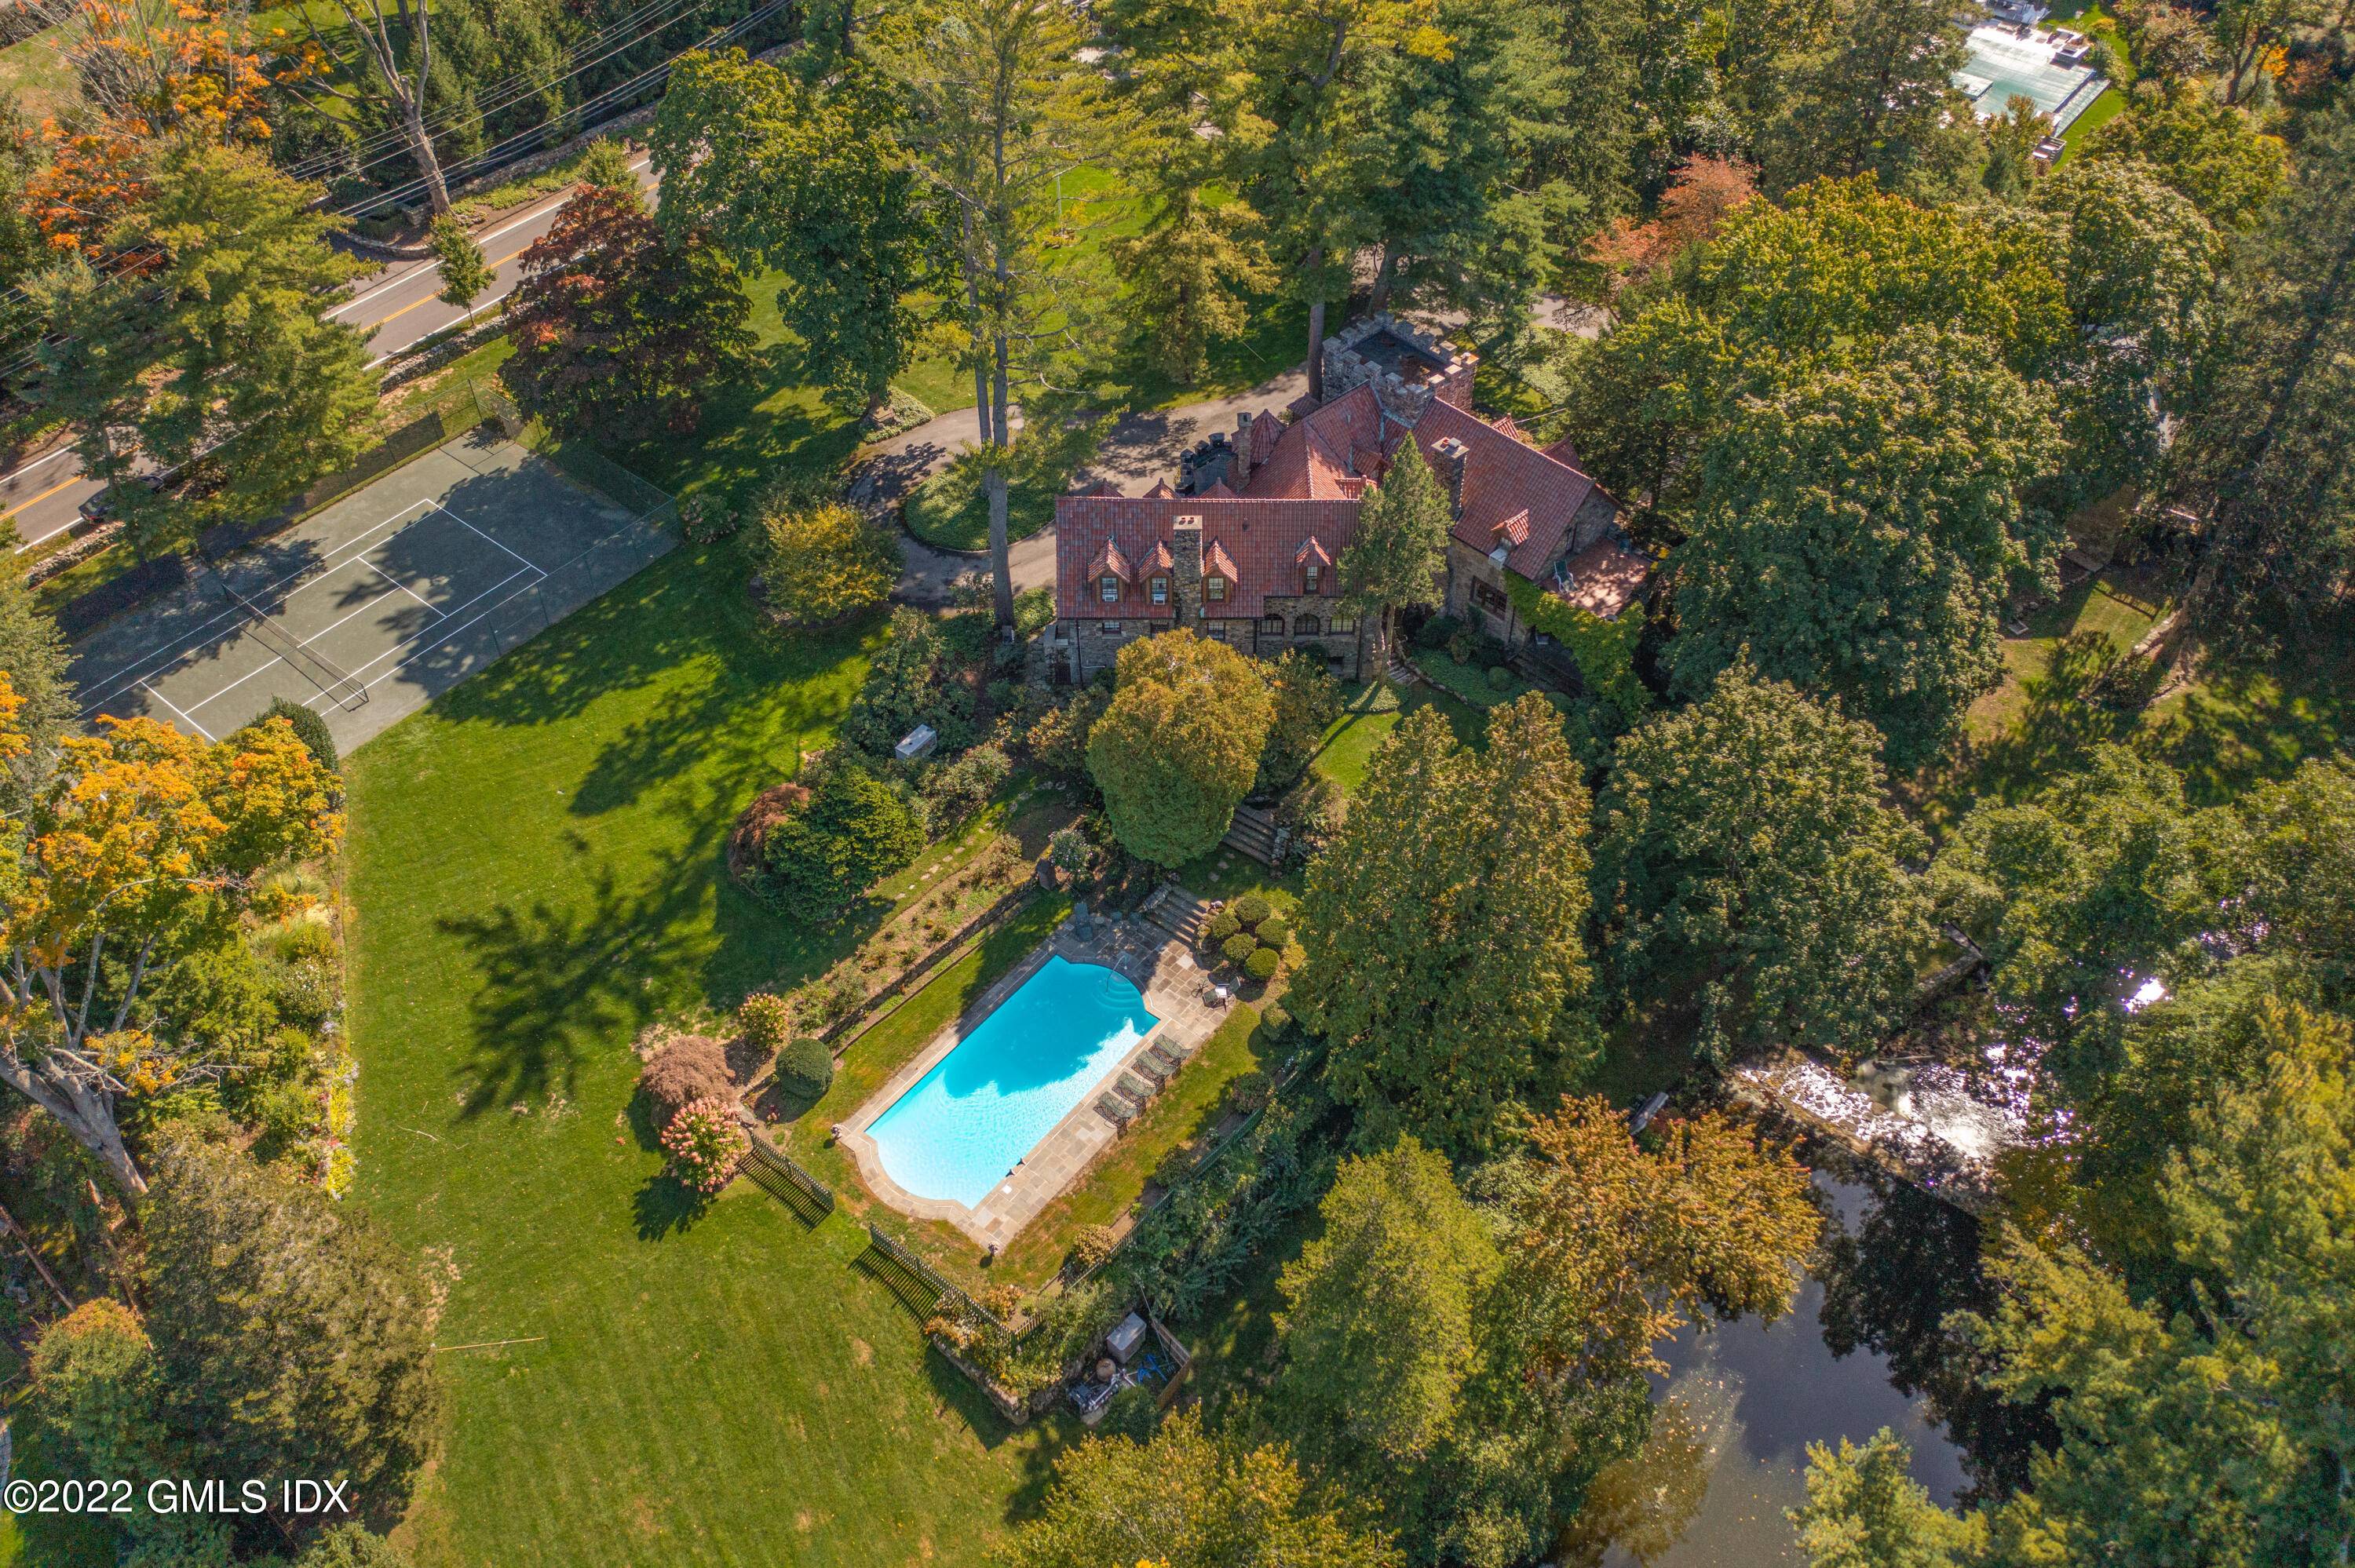 This impressive Stone Manor has a stately presence in Mid Country on beautiful Lake Ave.